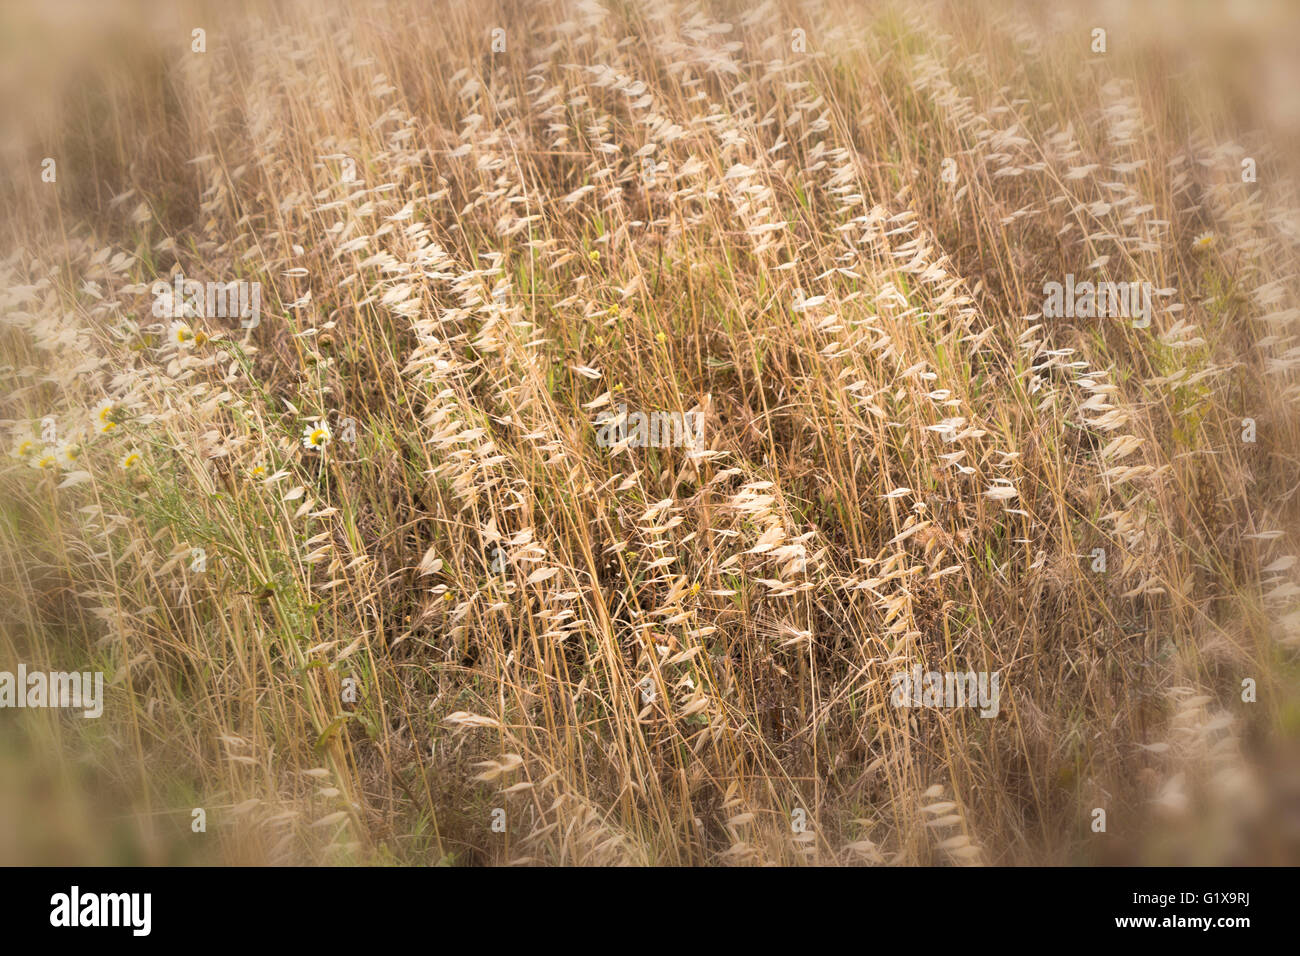 Dried grass blowing in the wind. Stock Photo